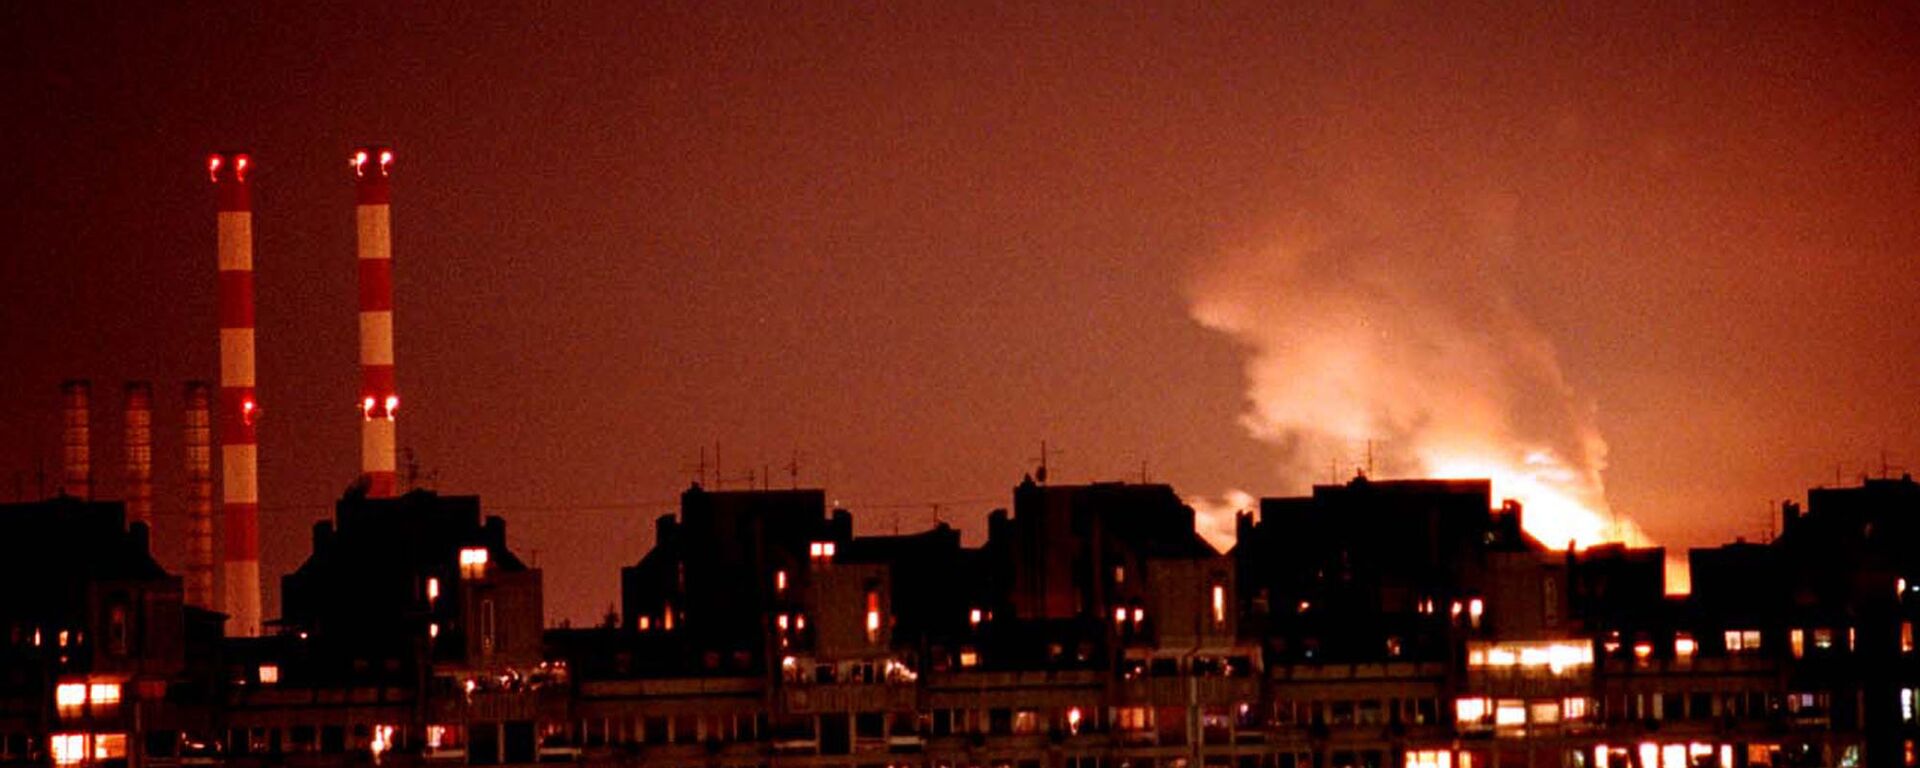 Flames from an explosion light up the Belgrade skyline near a power station after NATO cruise missiles and warplanes attacked Yugoslavia late Wednesday, March 24, 1999 - Sputnik International, 1920, 08.05.2019